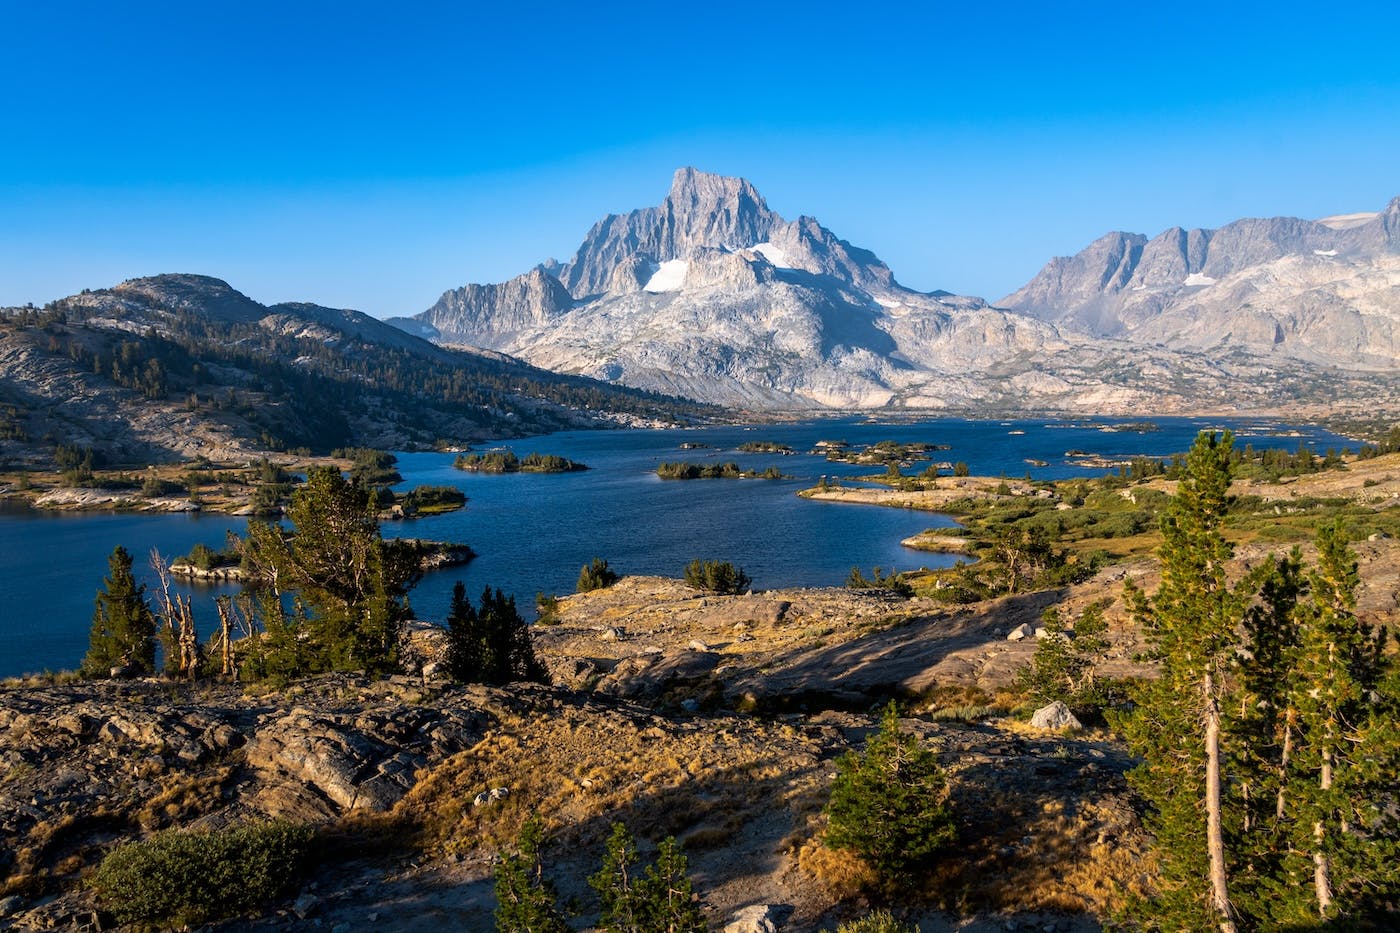 Big Agnes tent overlooking Thousand Island Lake in the Sierras